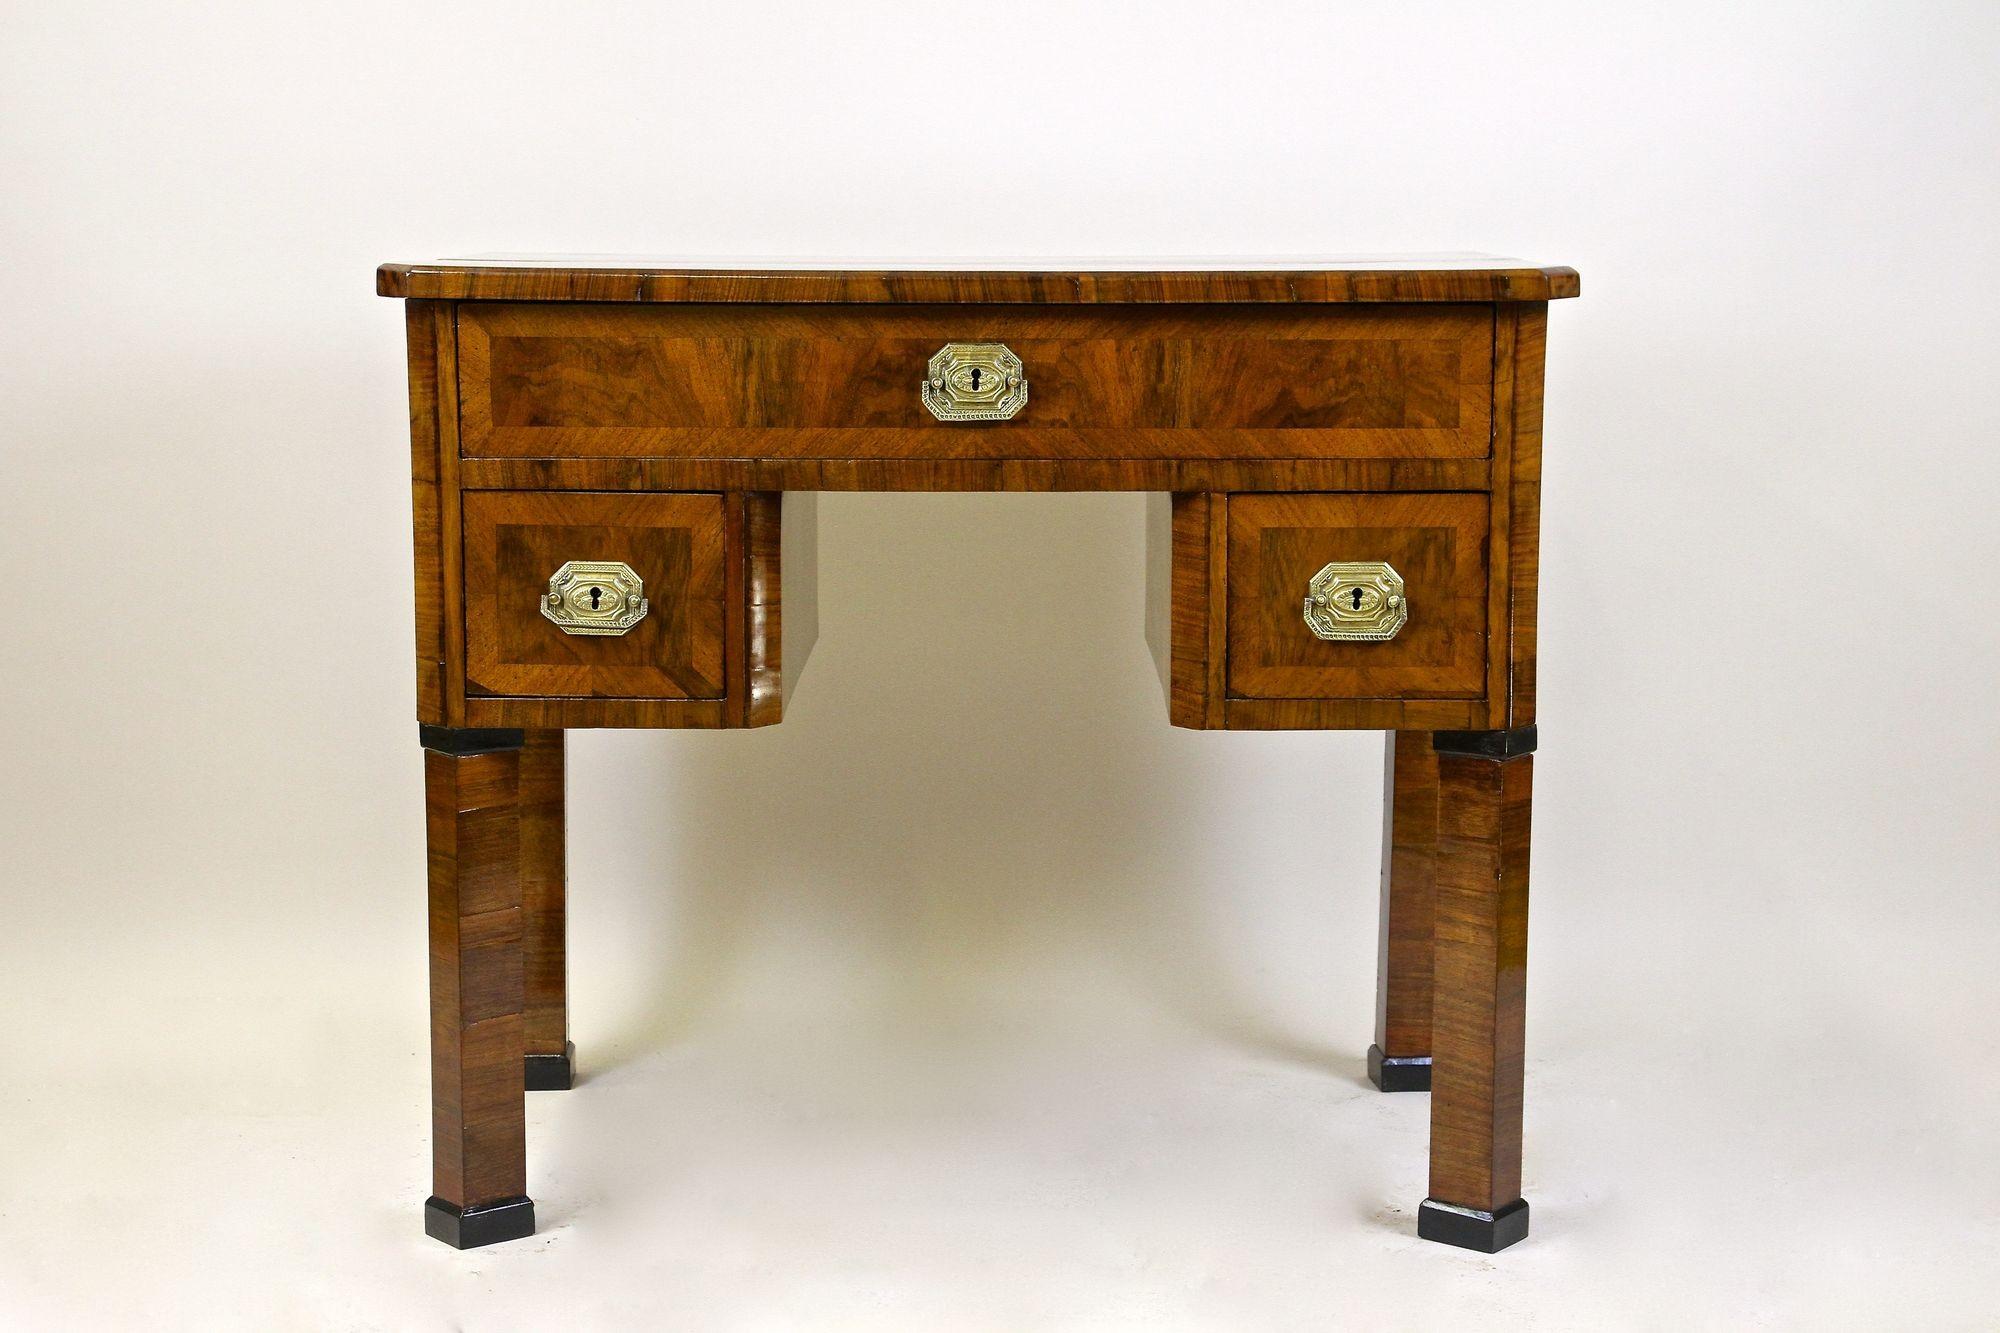 One of a kind, rare 19th century Biedermeier writing desk out of Austria veneered in fine nutwood/ walnut. Artfully crafted around 1830 in Vienna, this delicate Biedermeier so-called 